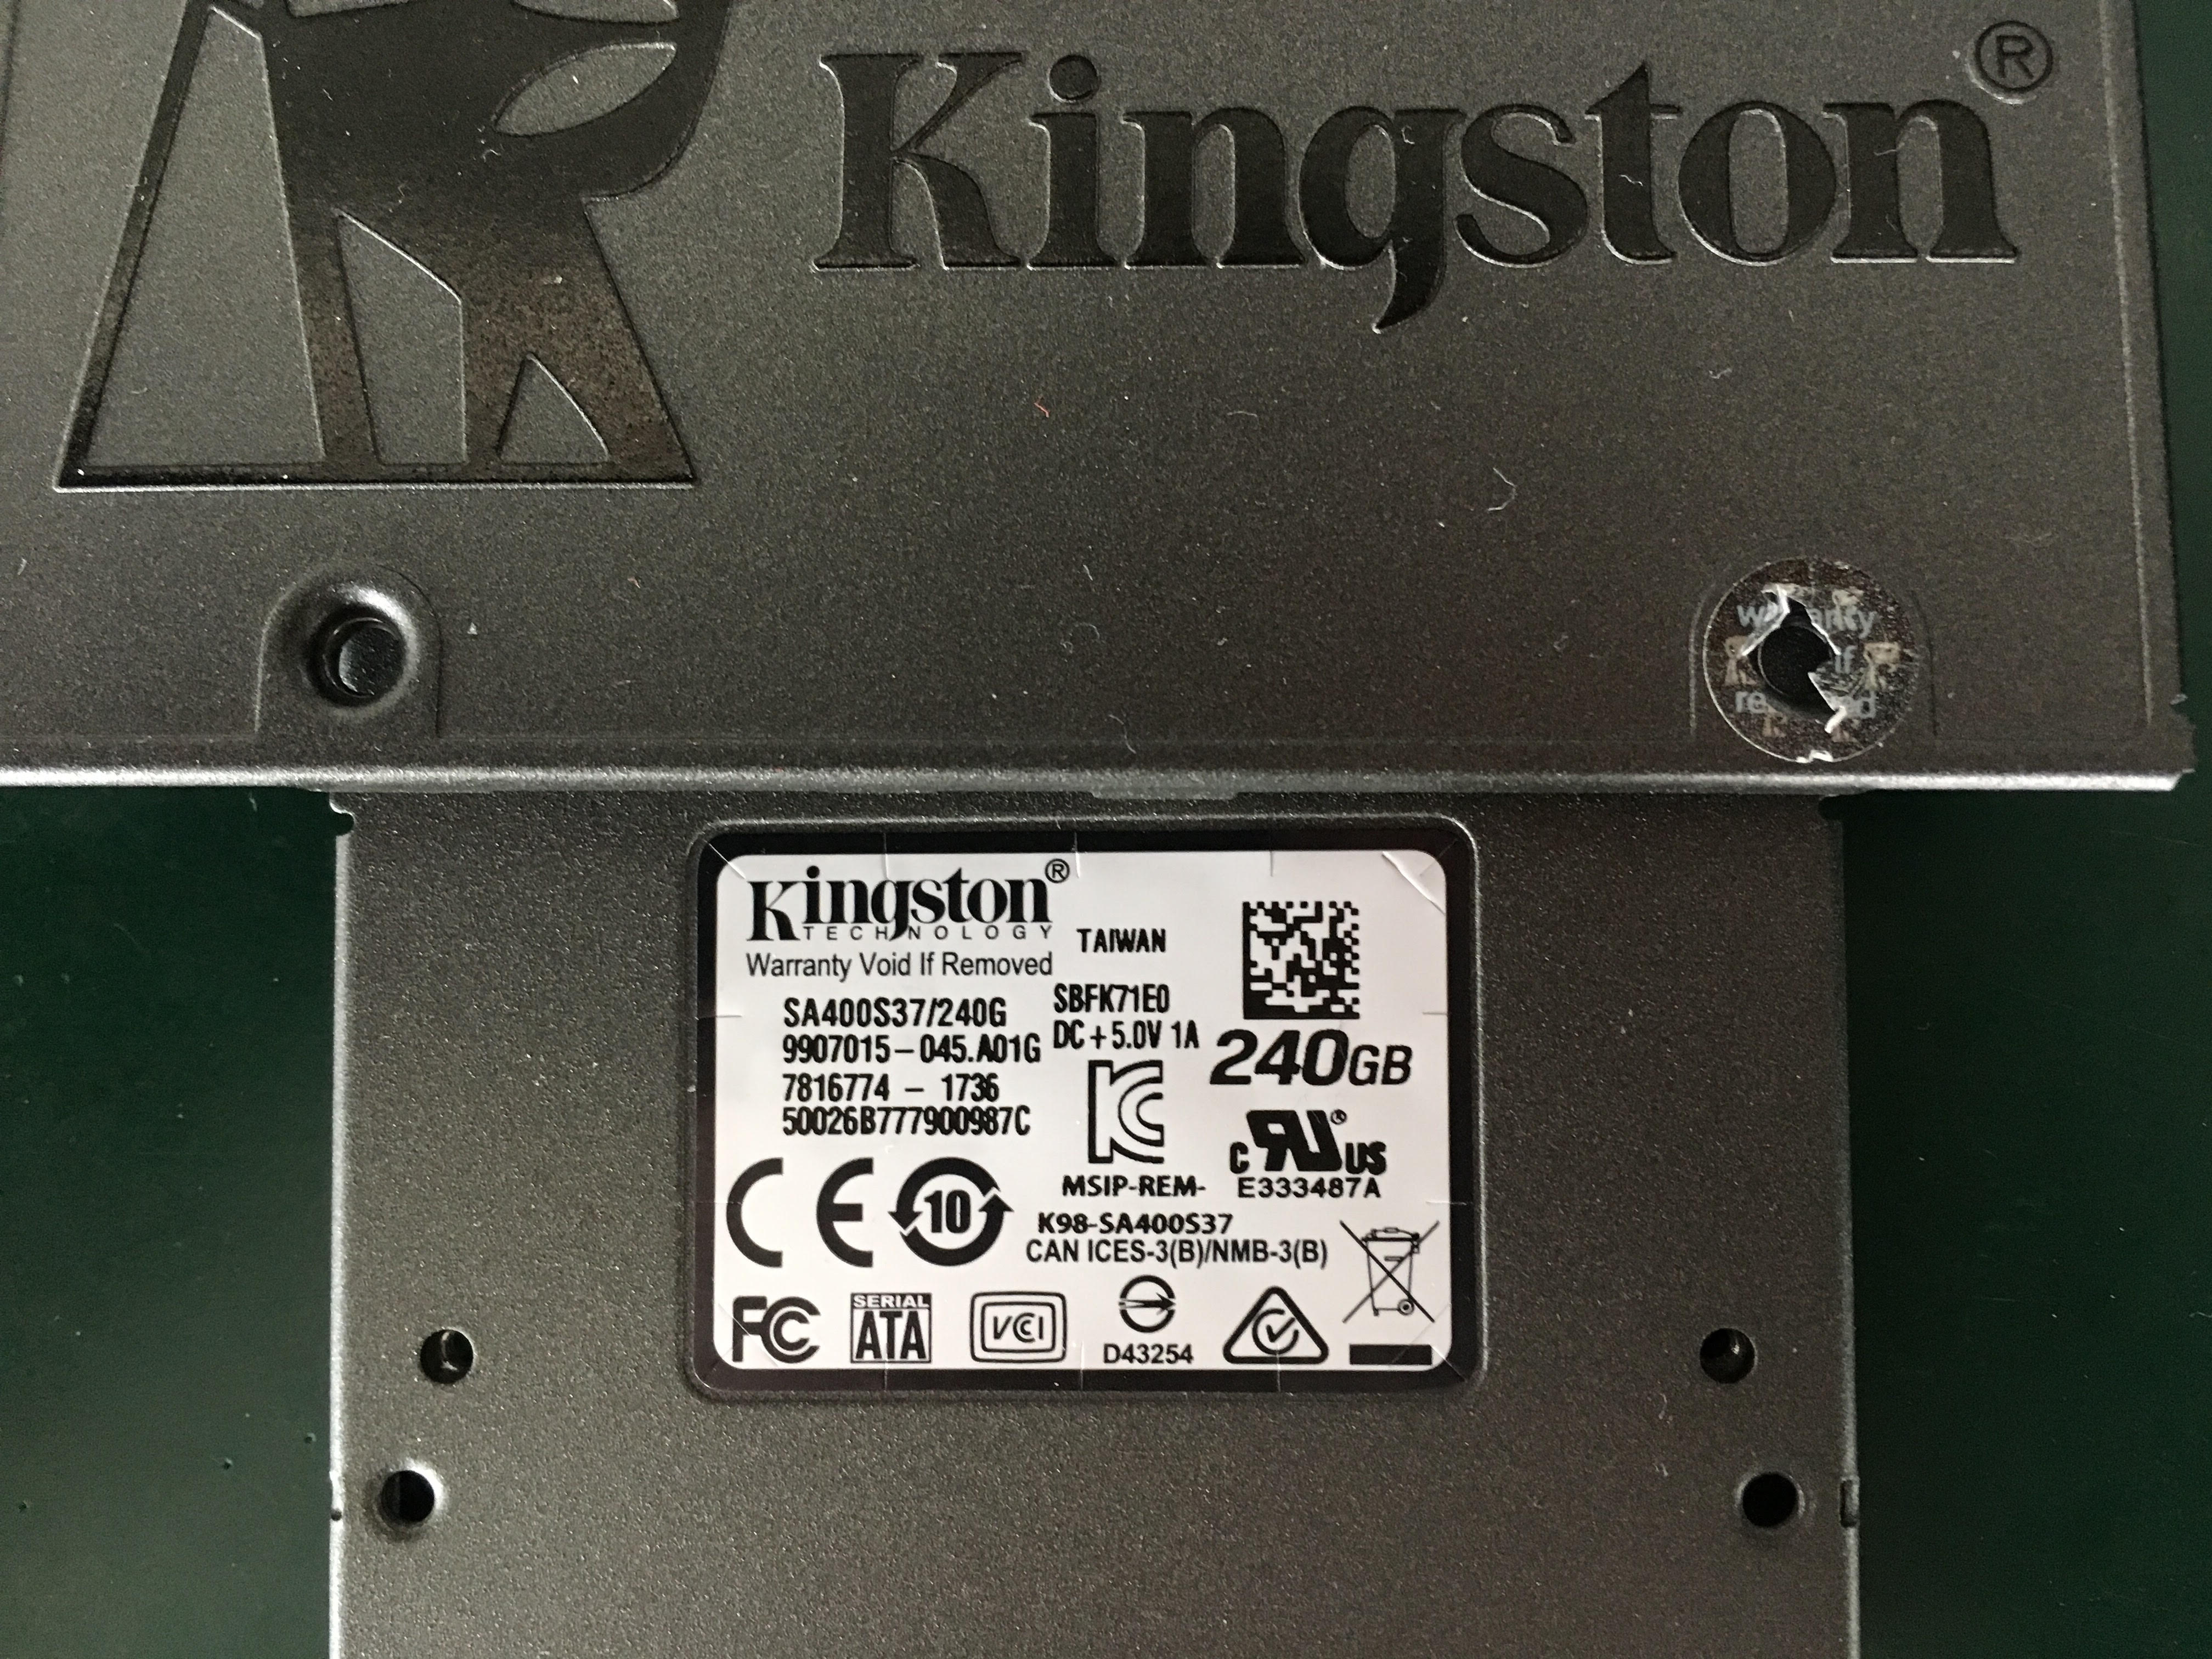 butterfly Resignation Shipping PC-3000 SSD. Phison Utility | PC-3000 Support Blog